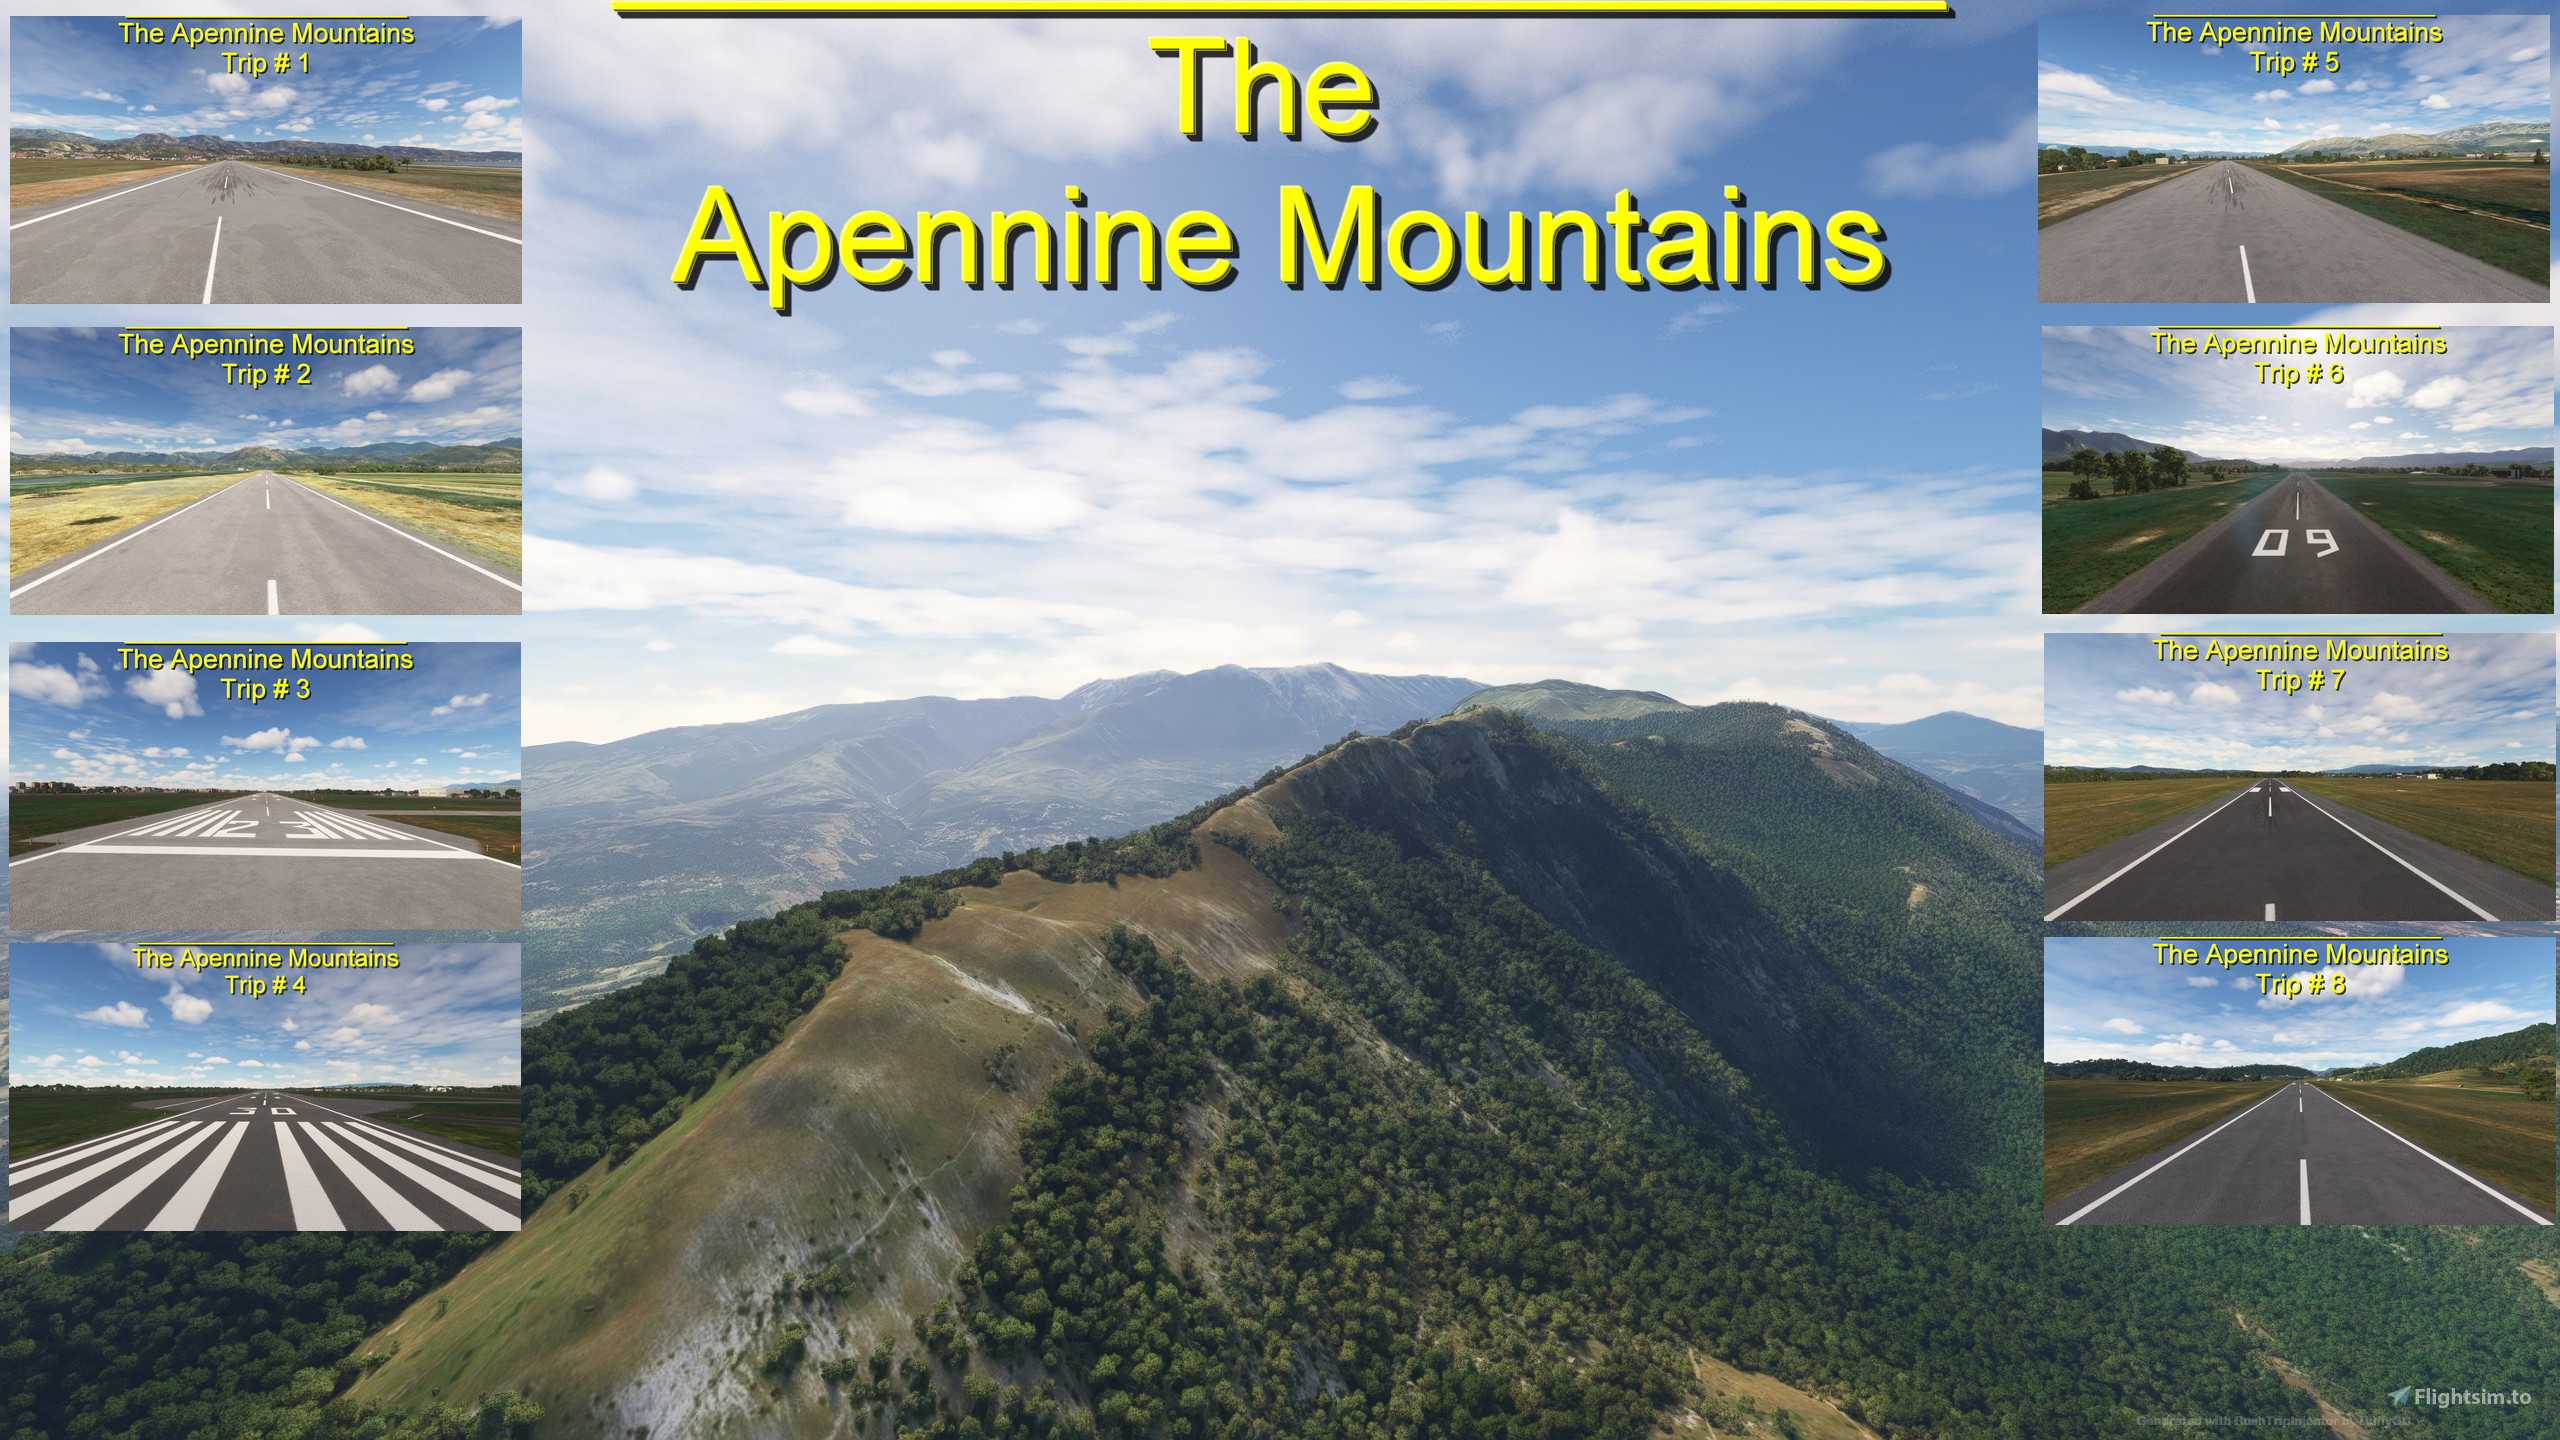 The Apennine Mountains